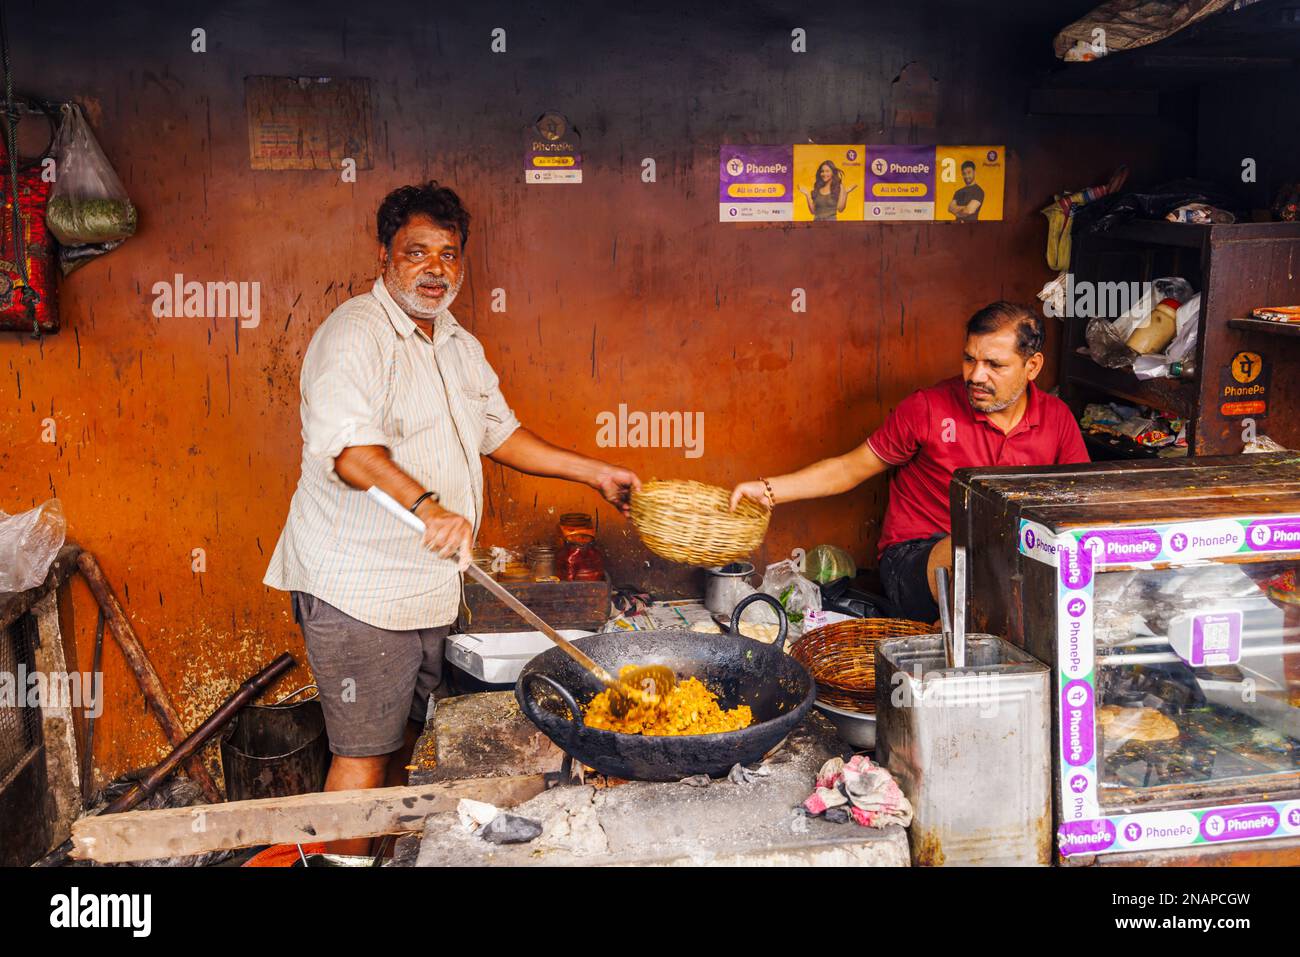 Street food being prepared and cooked in a roadside shop in Fariapukur, Shyam Bazar, a suburb of Kolkata, West Bengal, India Stock Photo